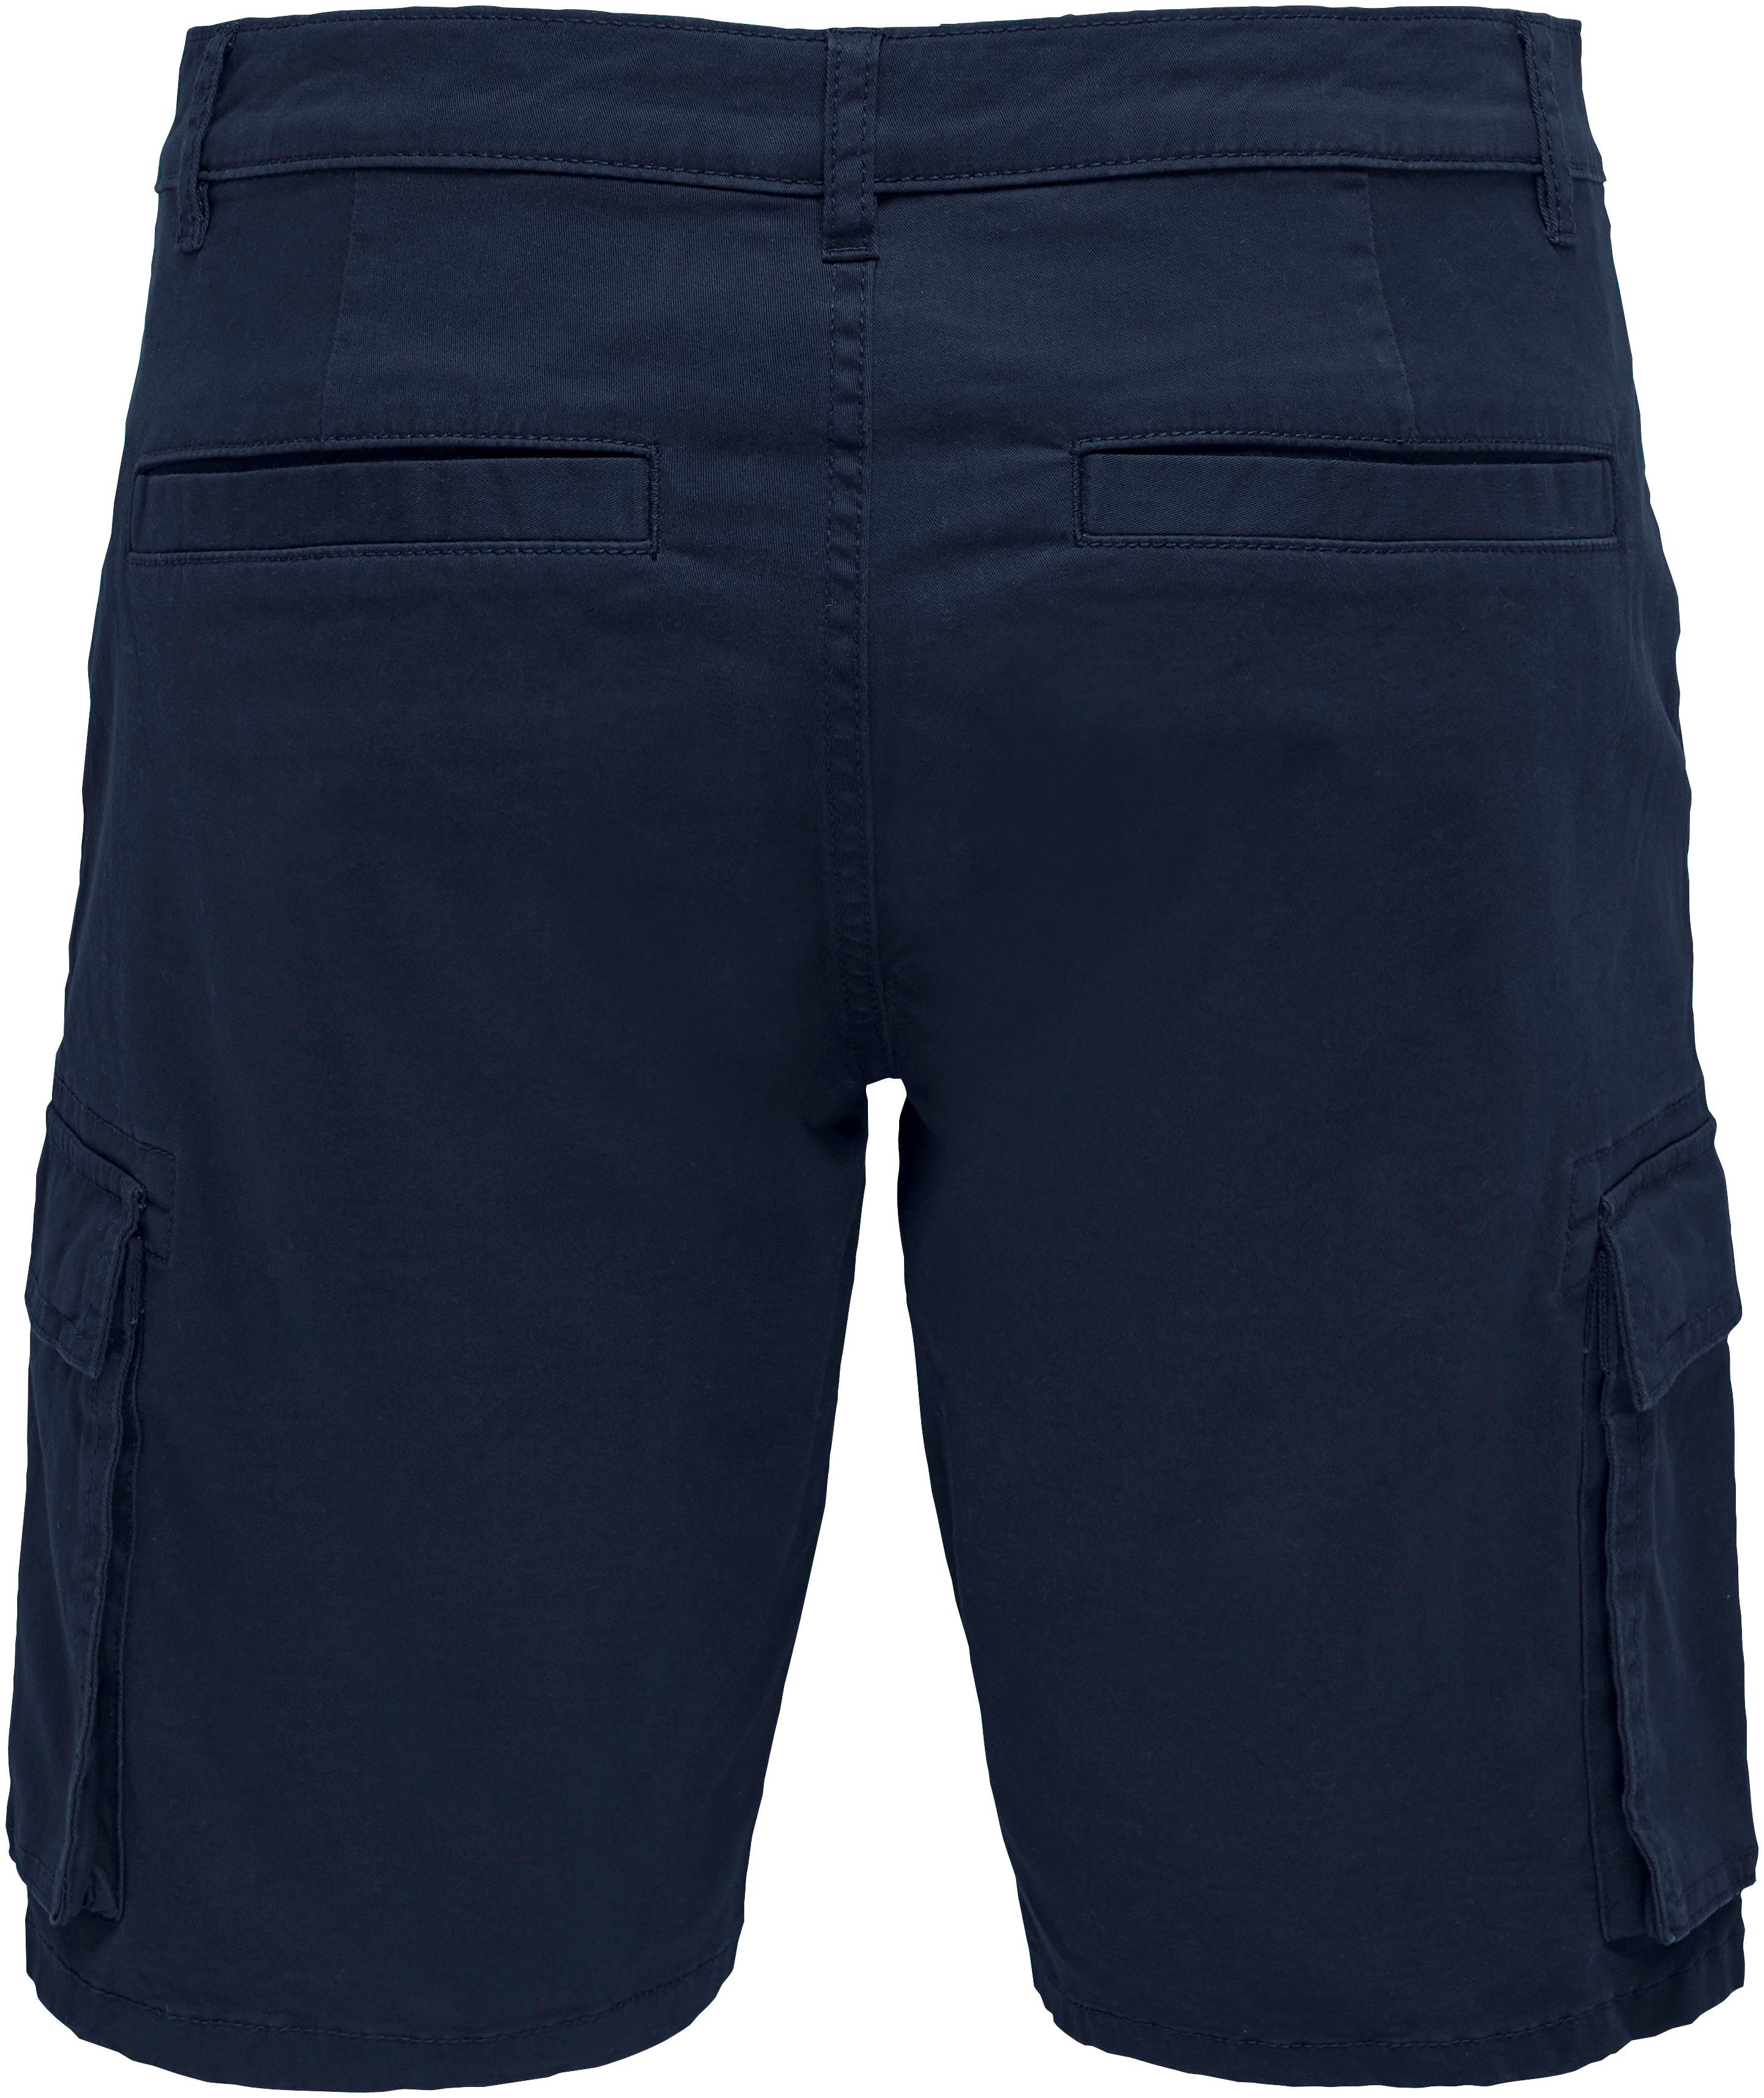 ONLY & SONS Cargoshorts CAM SHORTS STAGE navy CARGO